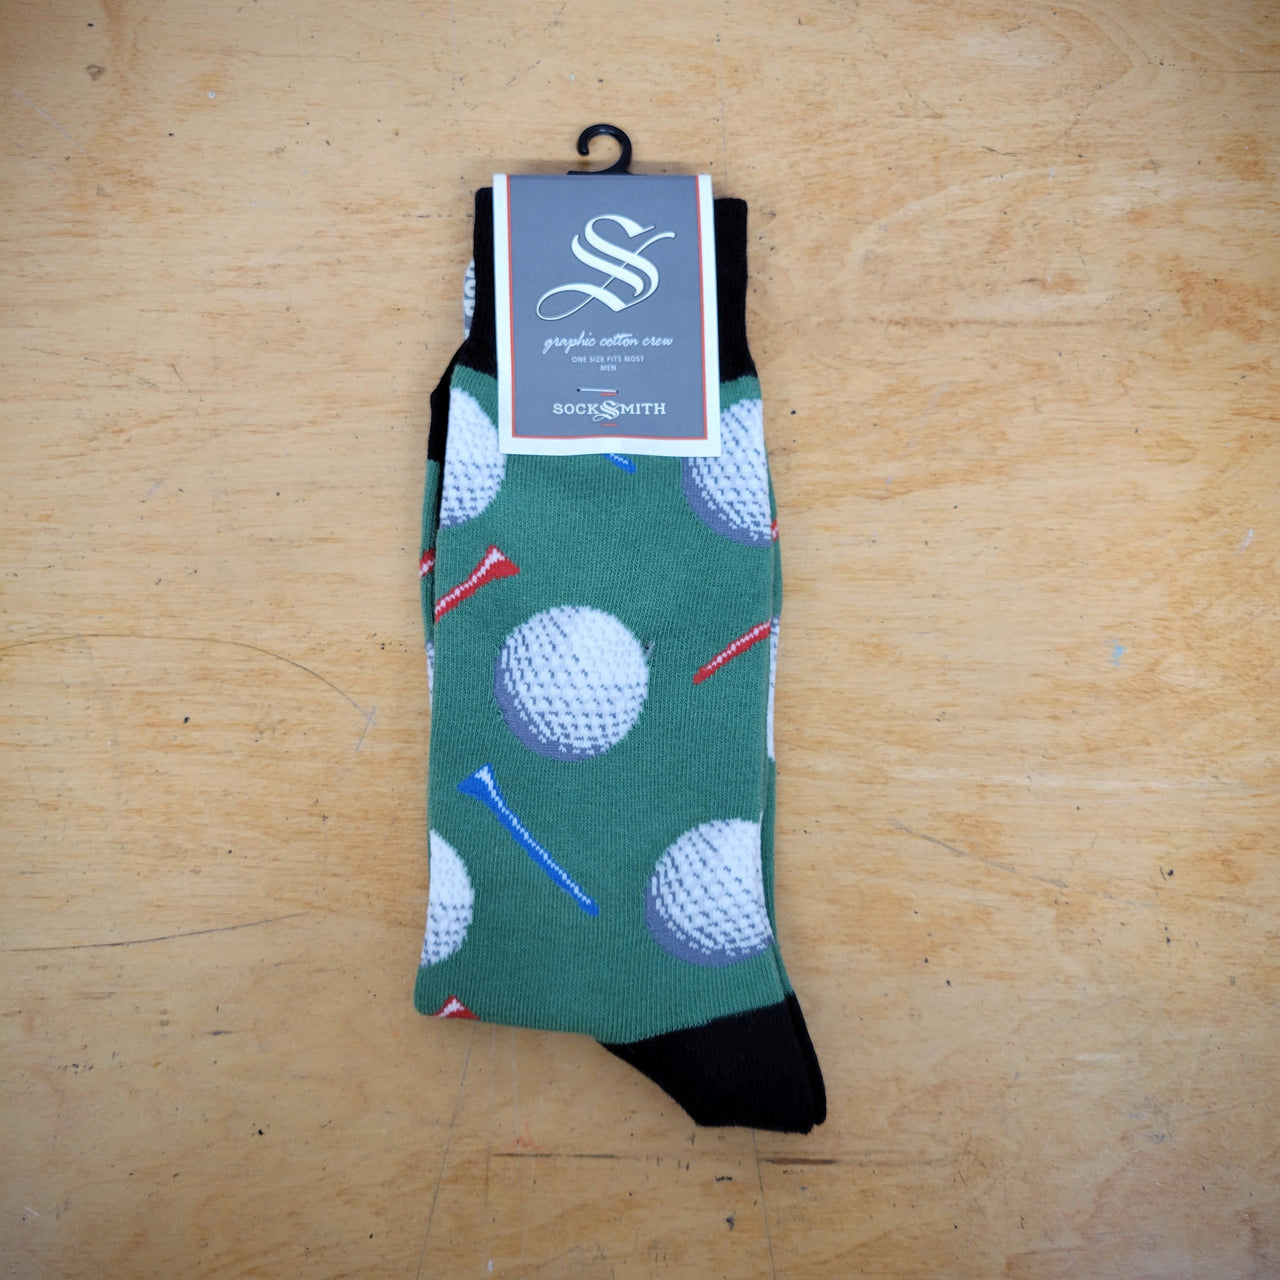 A pair of green socks with golf balls on them.